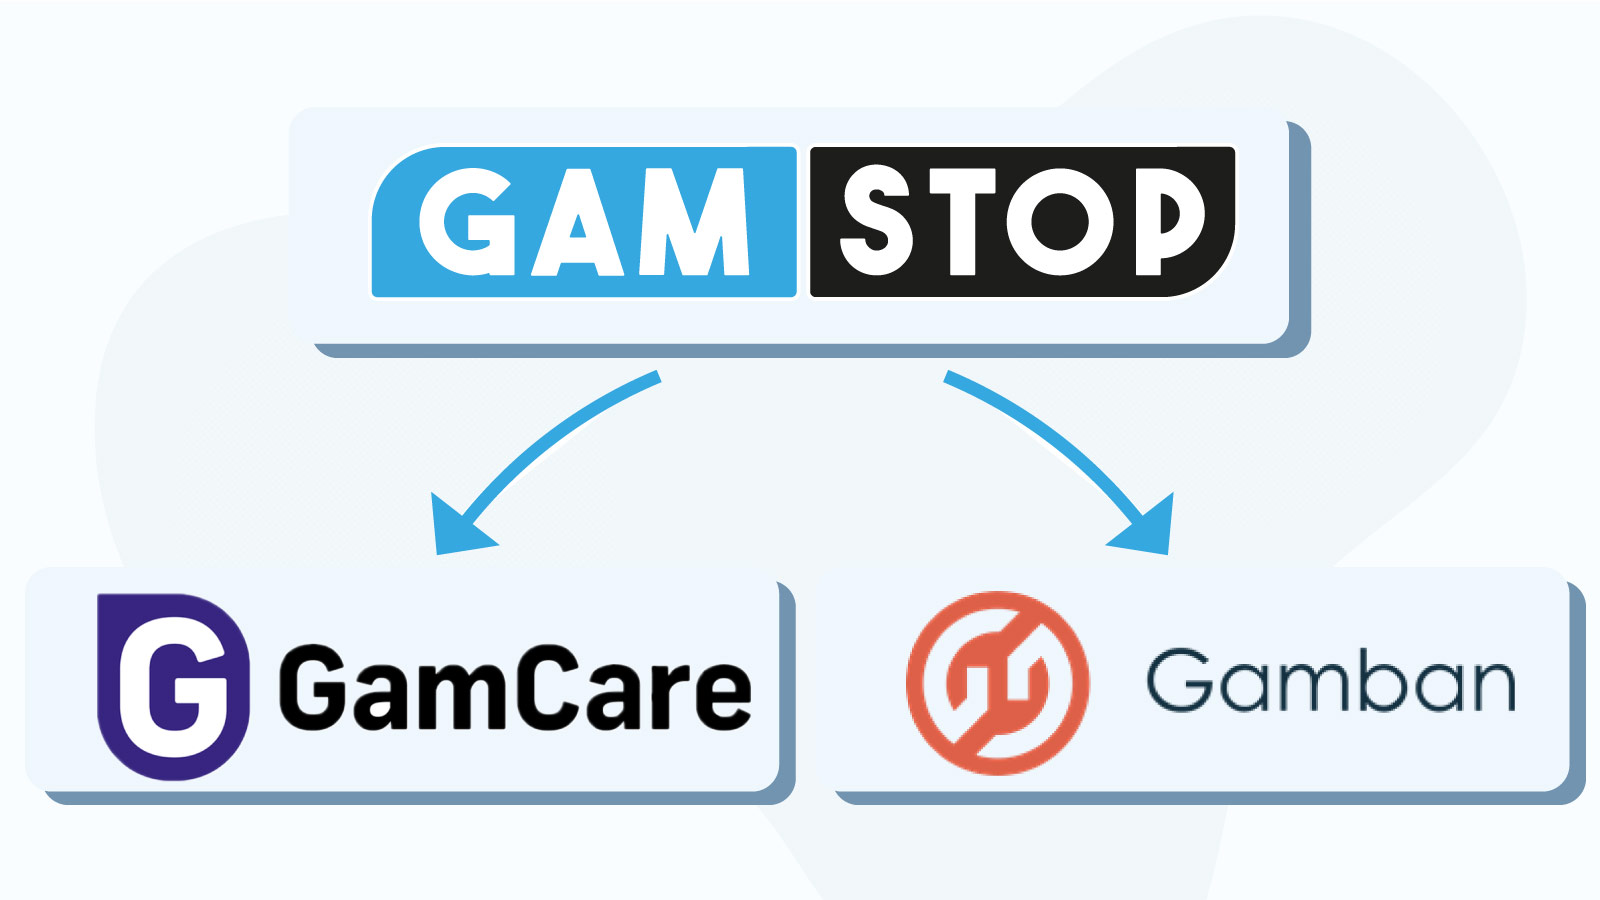 iGaming's Future with GAMSTOP